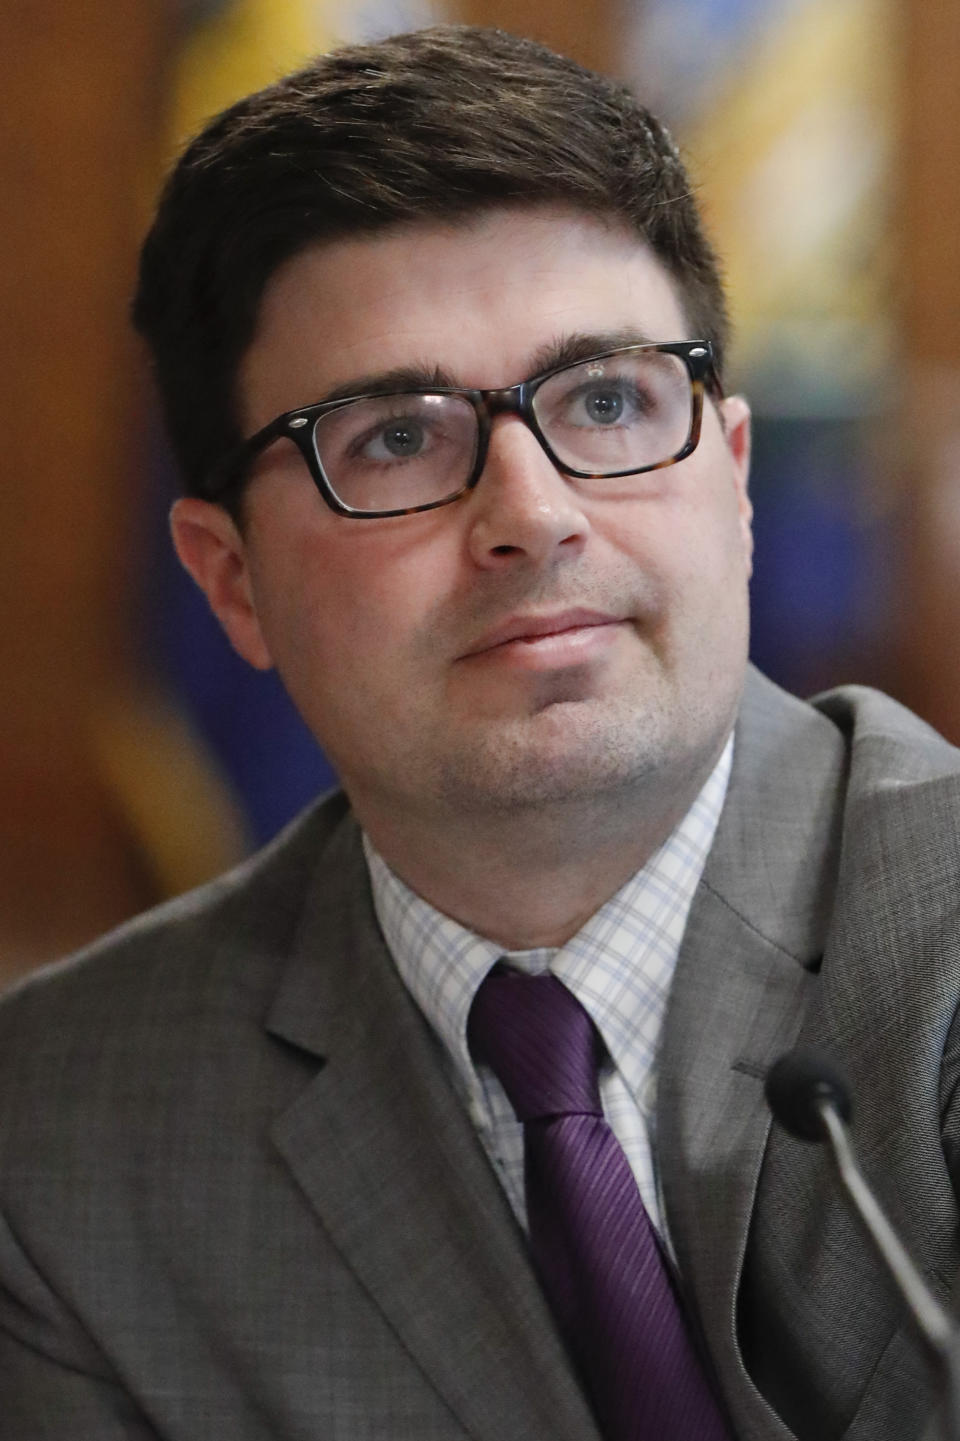 Pittsburgh city council member Corey O'Connor listens as fellow council members speak during the Pittsburgh City Council meeting where members voted 6-3 to pass tentative approval to gun-control legislation he co-sponsored, Wednesday, March 27, 2019, in Pittsburgh. The bill was introduced in the wake of the synagogue massacre last October. (AP Photo/Keith Srakocic)